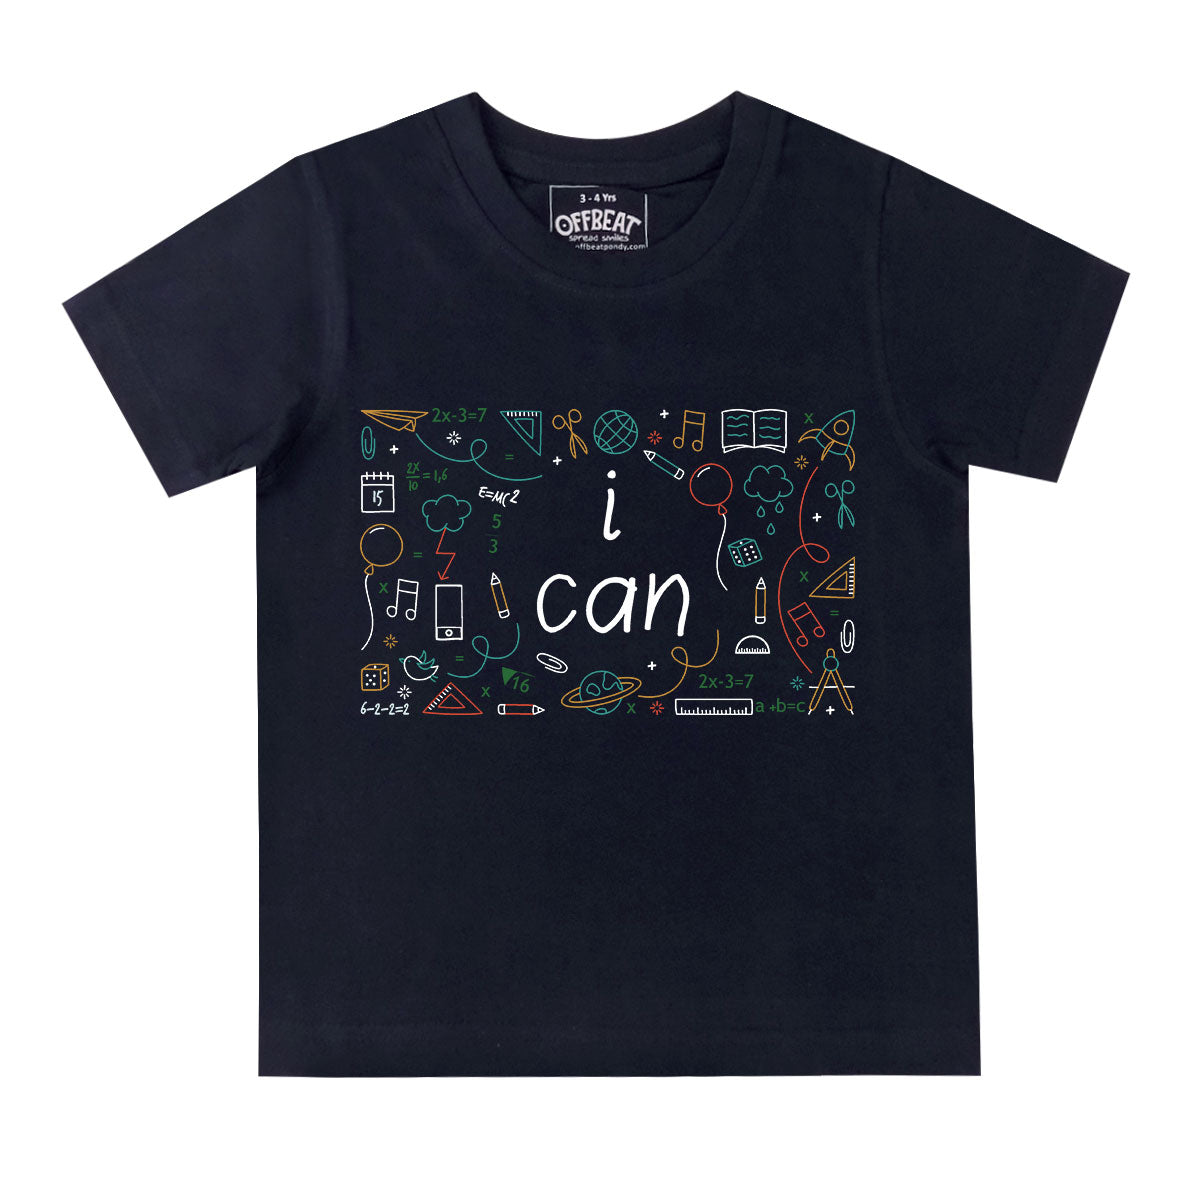 I Can - Premium Round Neck Cotton Tees for Kids - Navy Blue